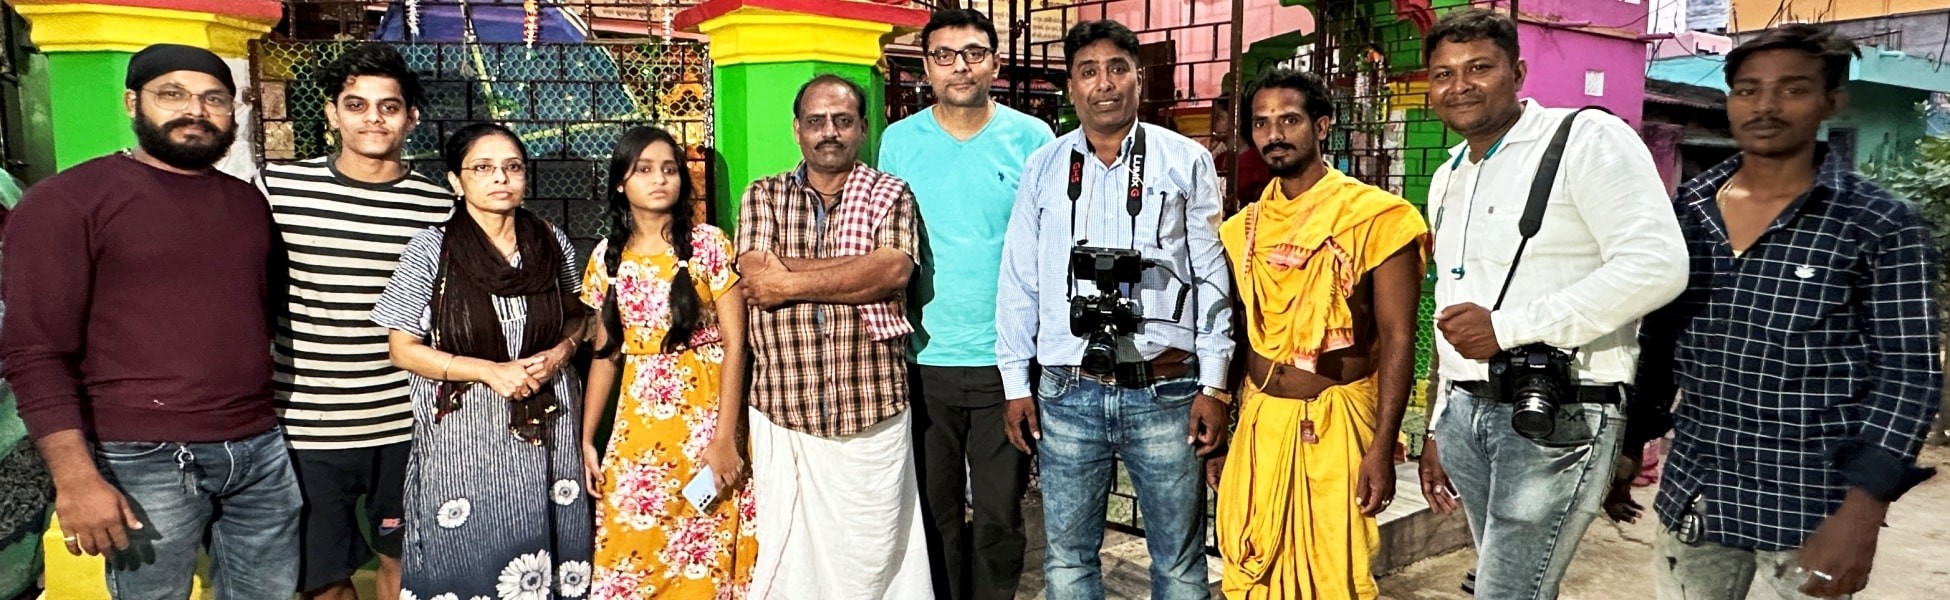 film production services in Warangal Rural, video production services in Warangal Rural, tv production services in Warangal Rural, production services in Warangal Rural